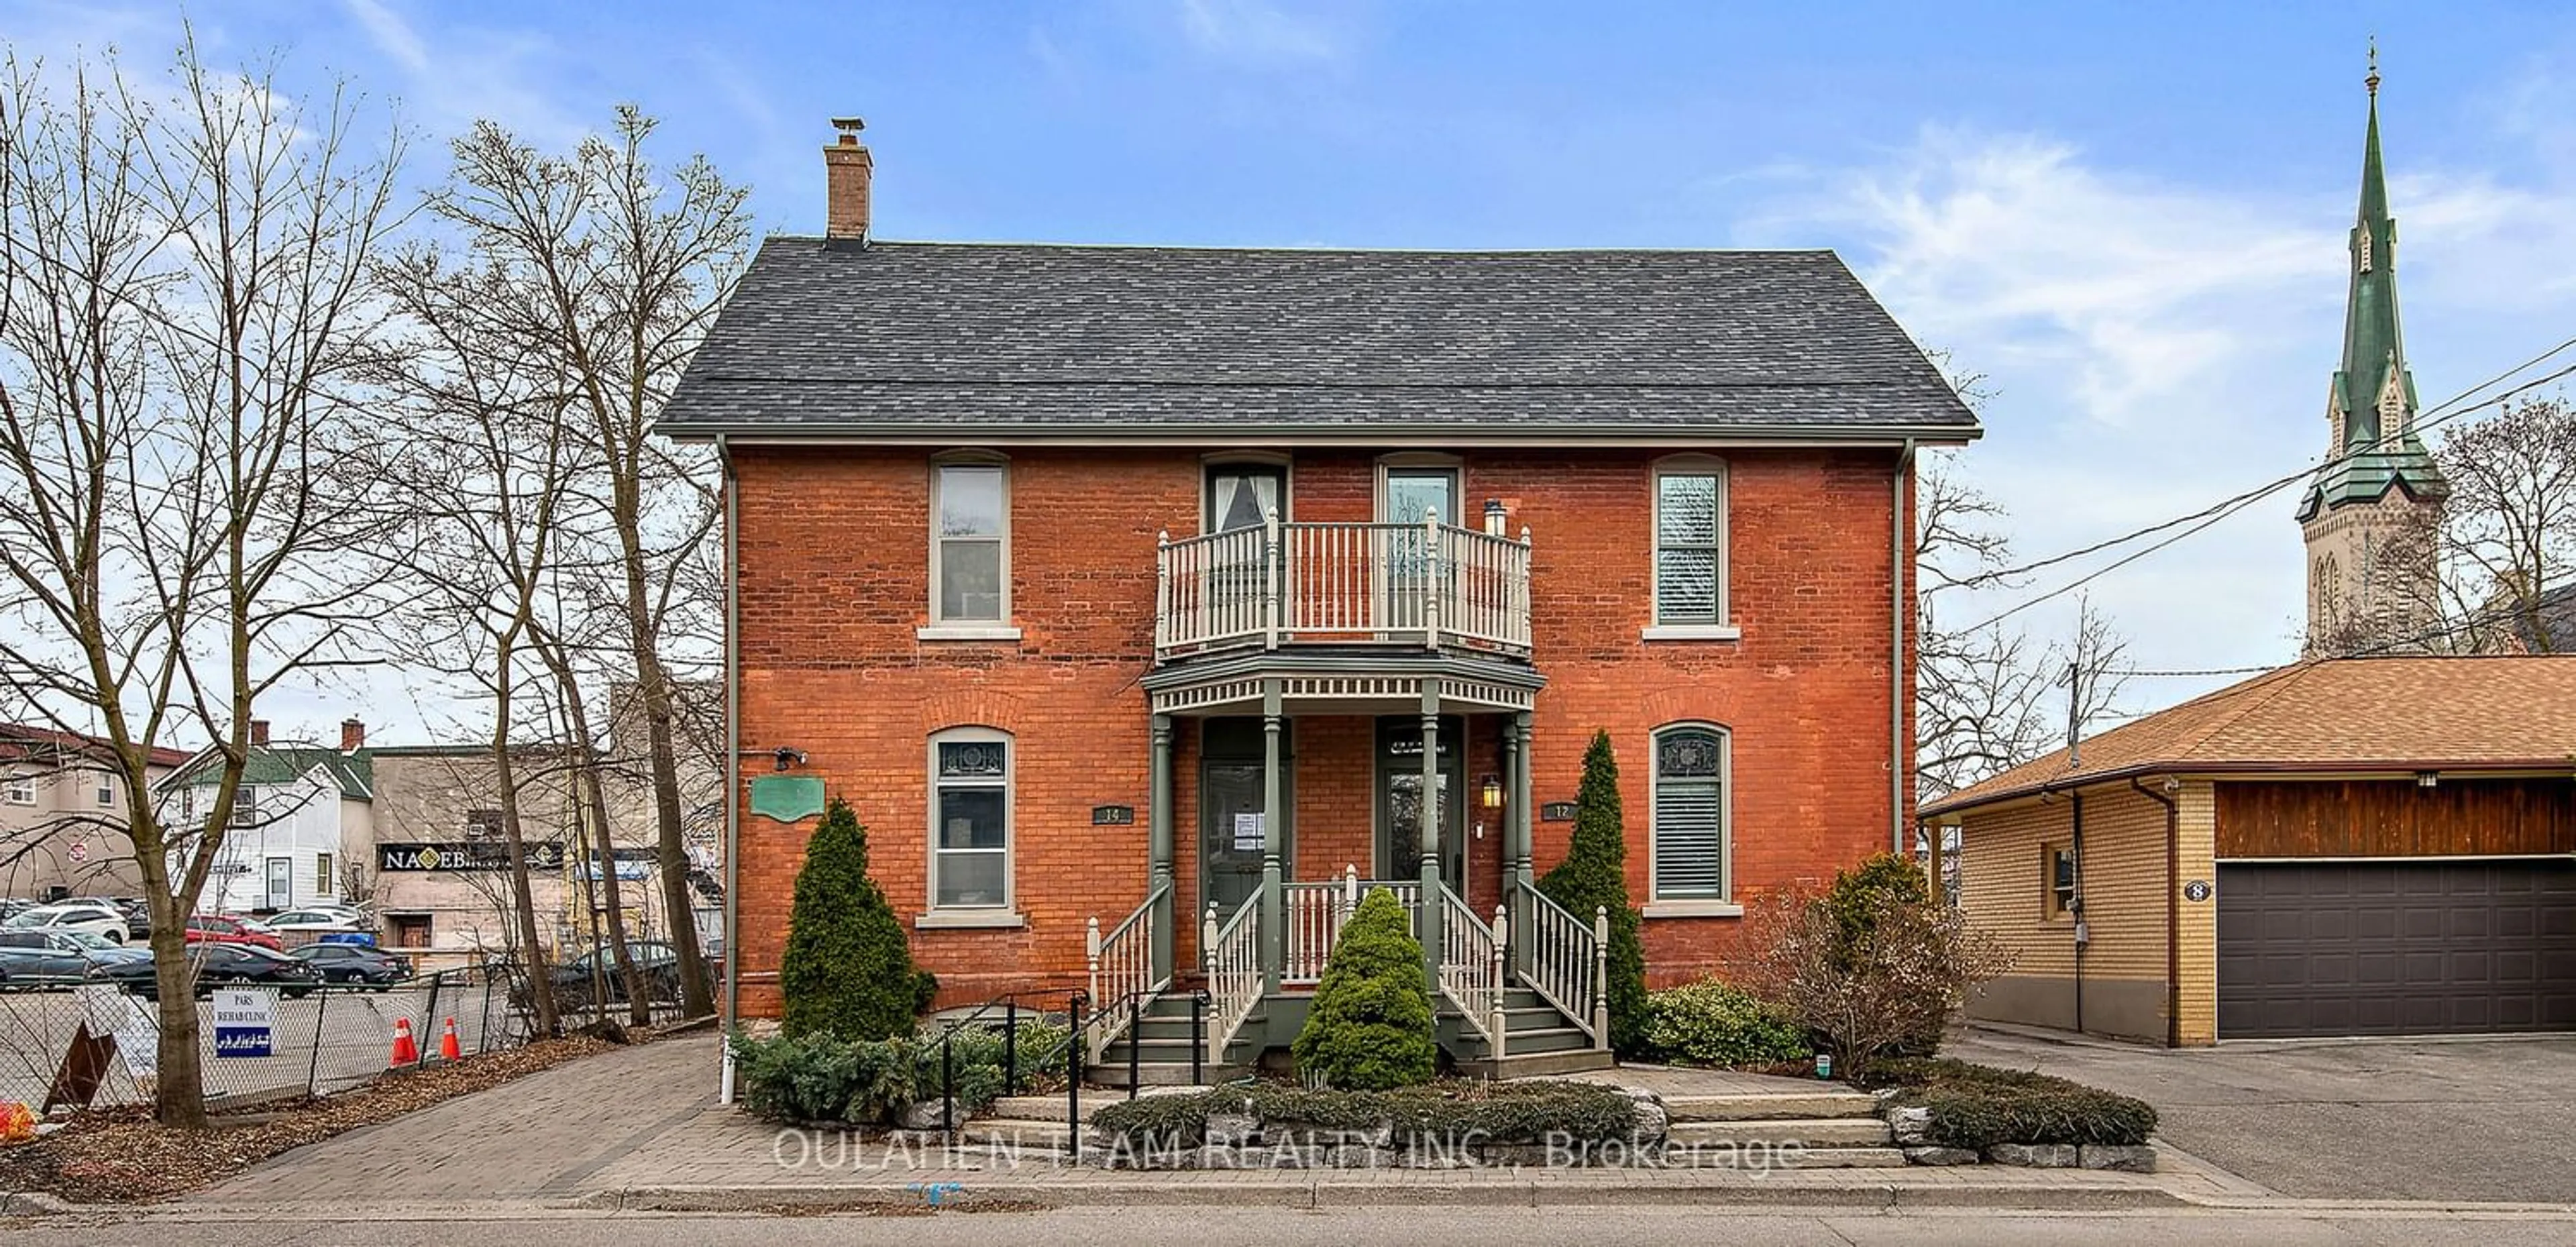 Home with brick exterior material for 12 Church St, Richmond Hill Ontario L4C 1W2